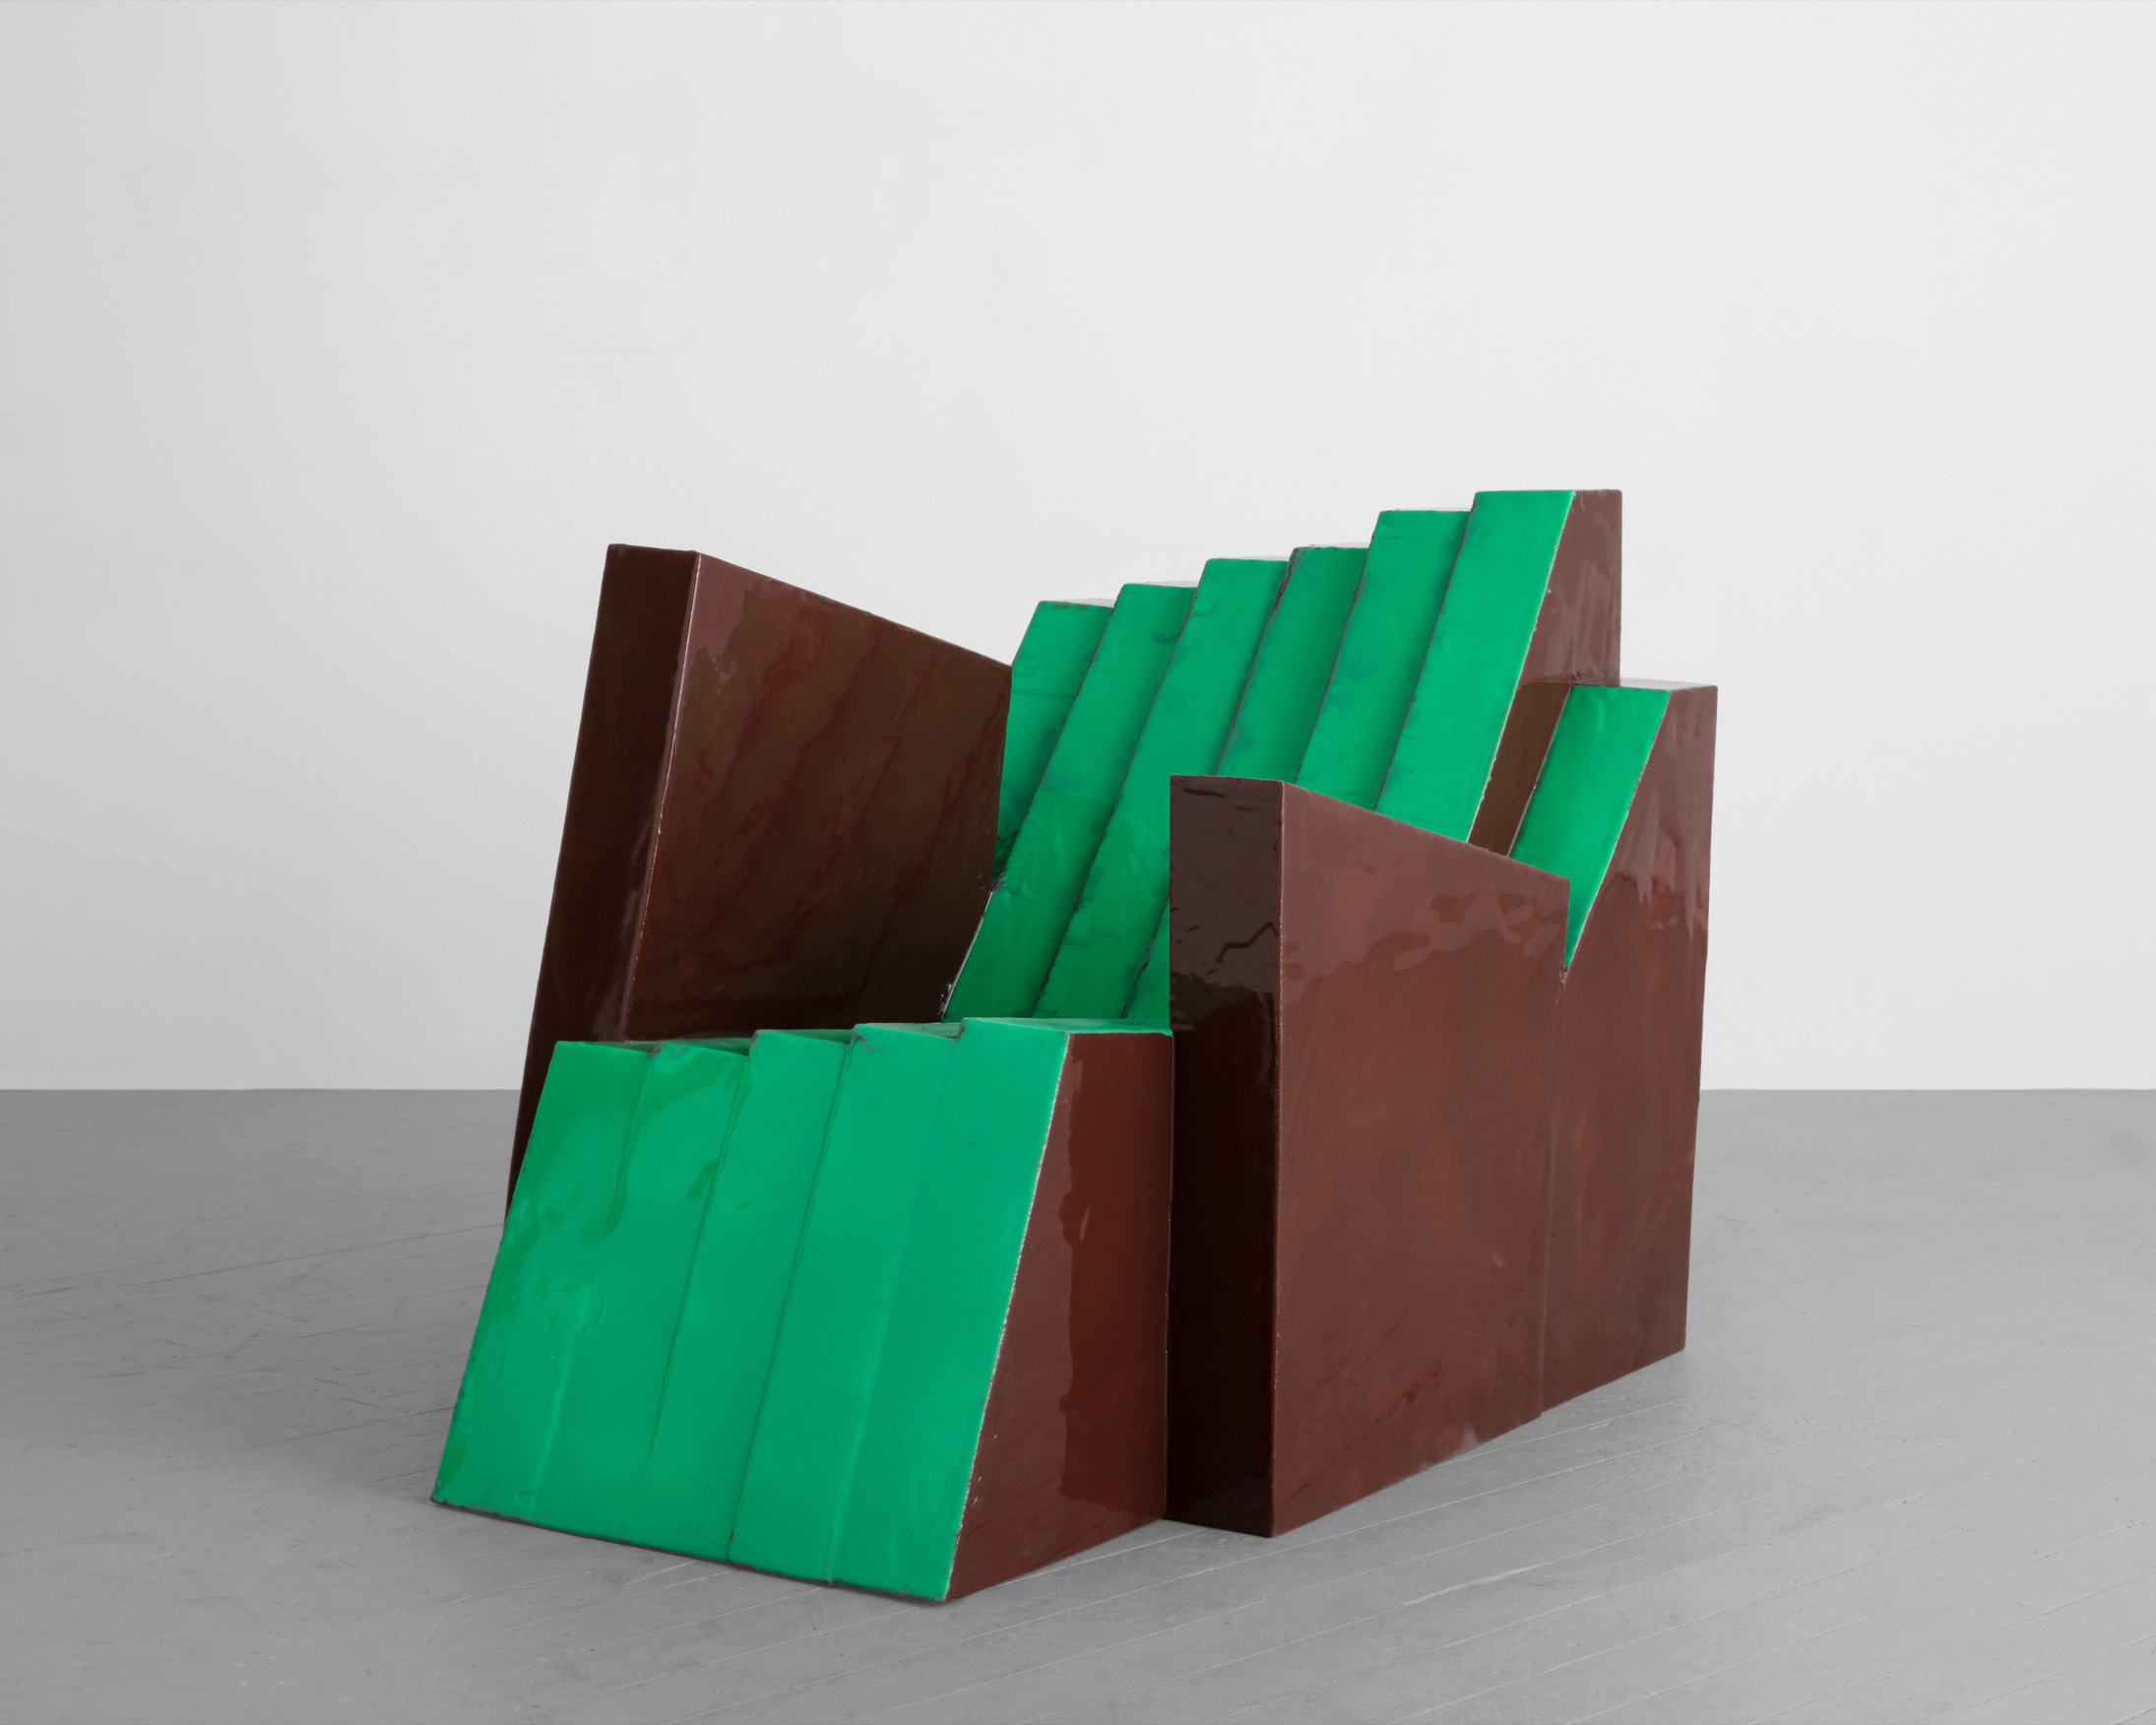 Gallery view of large abstract, asymmetrical brown and green chair 